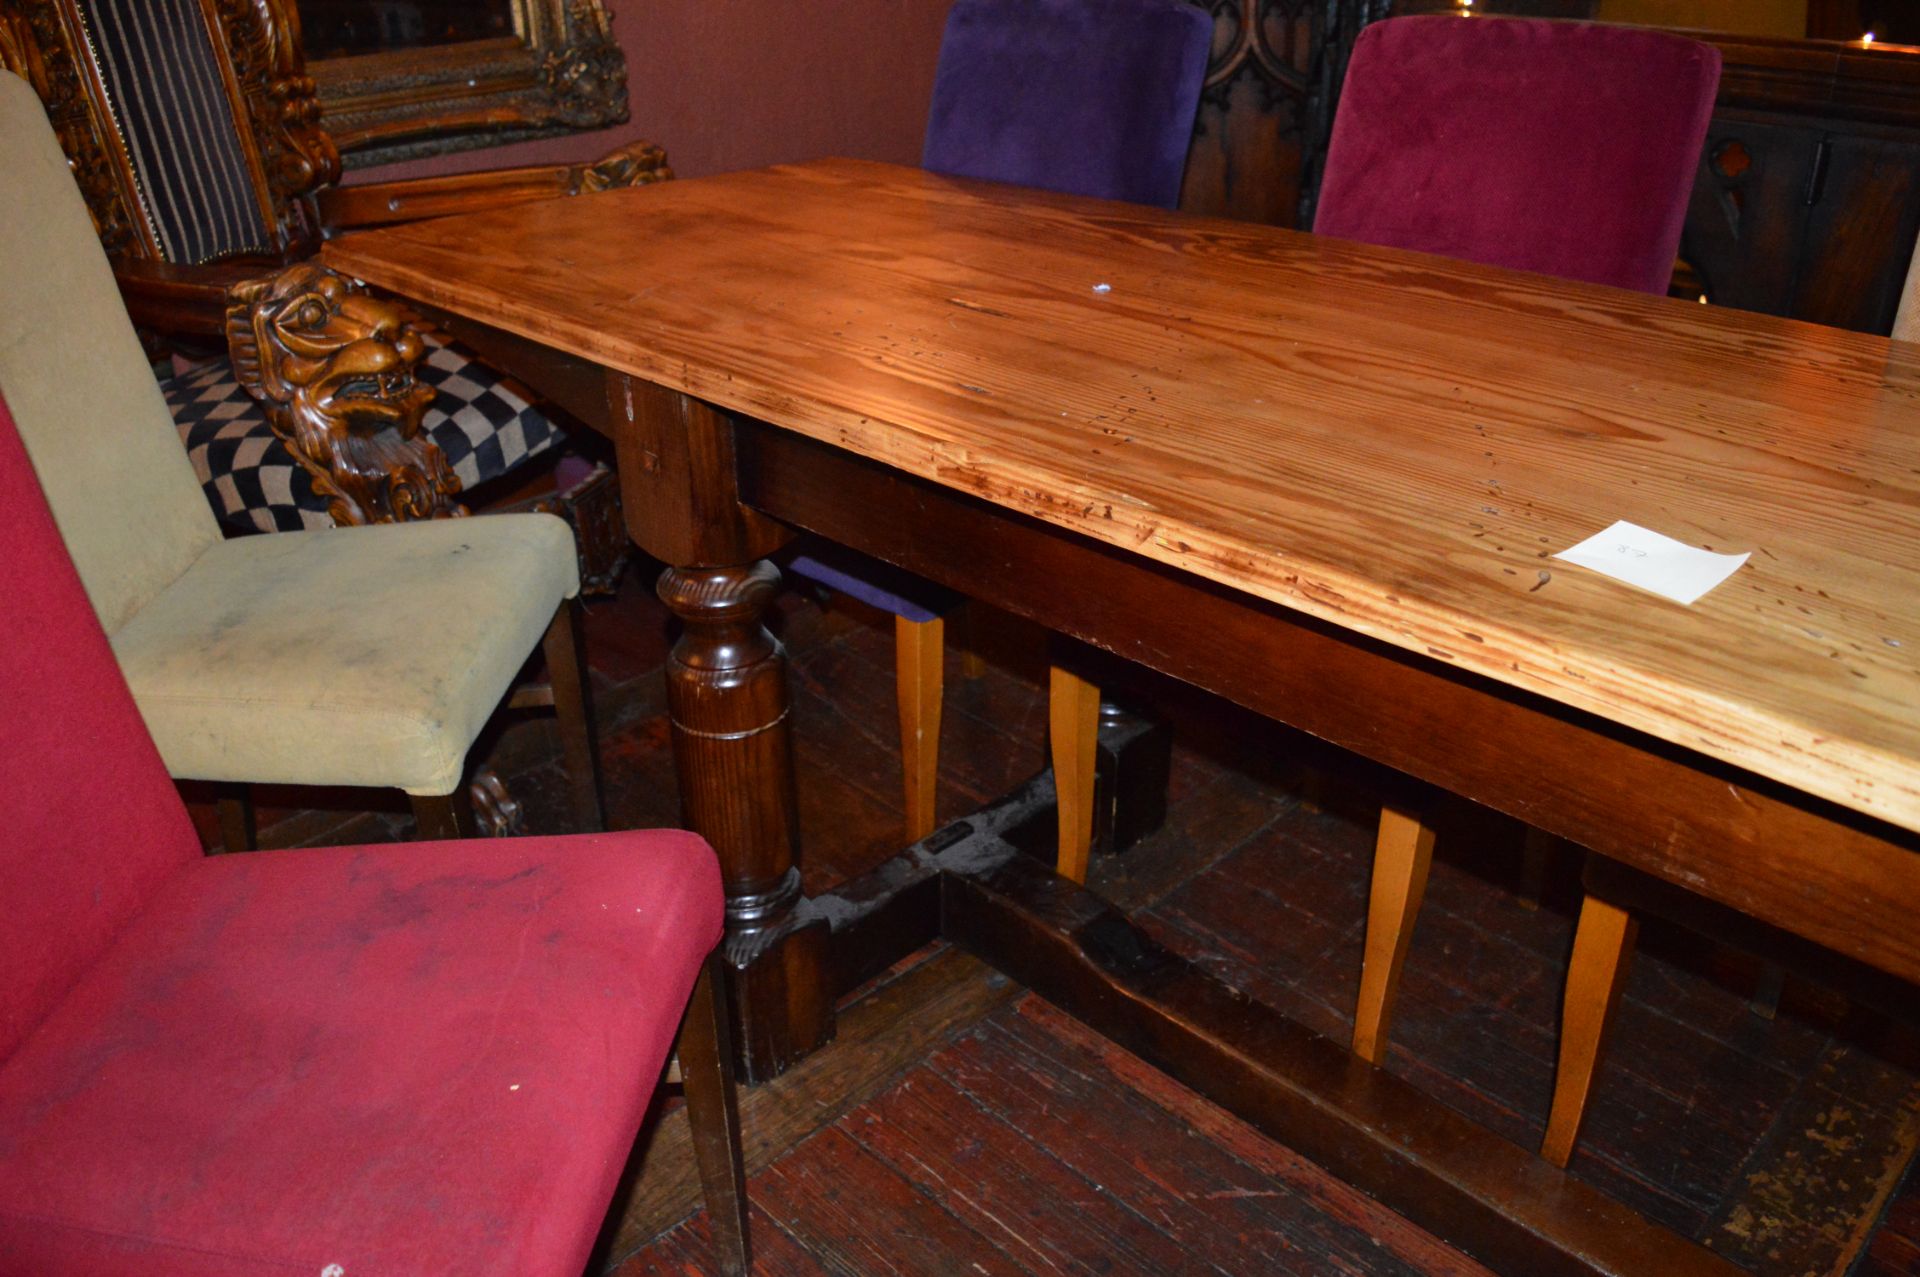 1 x Impressive Antique and Very Long Refectory Table - Features a single piece top which is full - Image 17 of 18